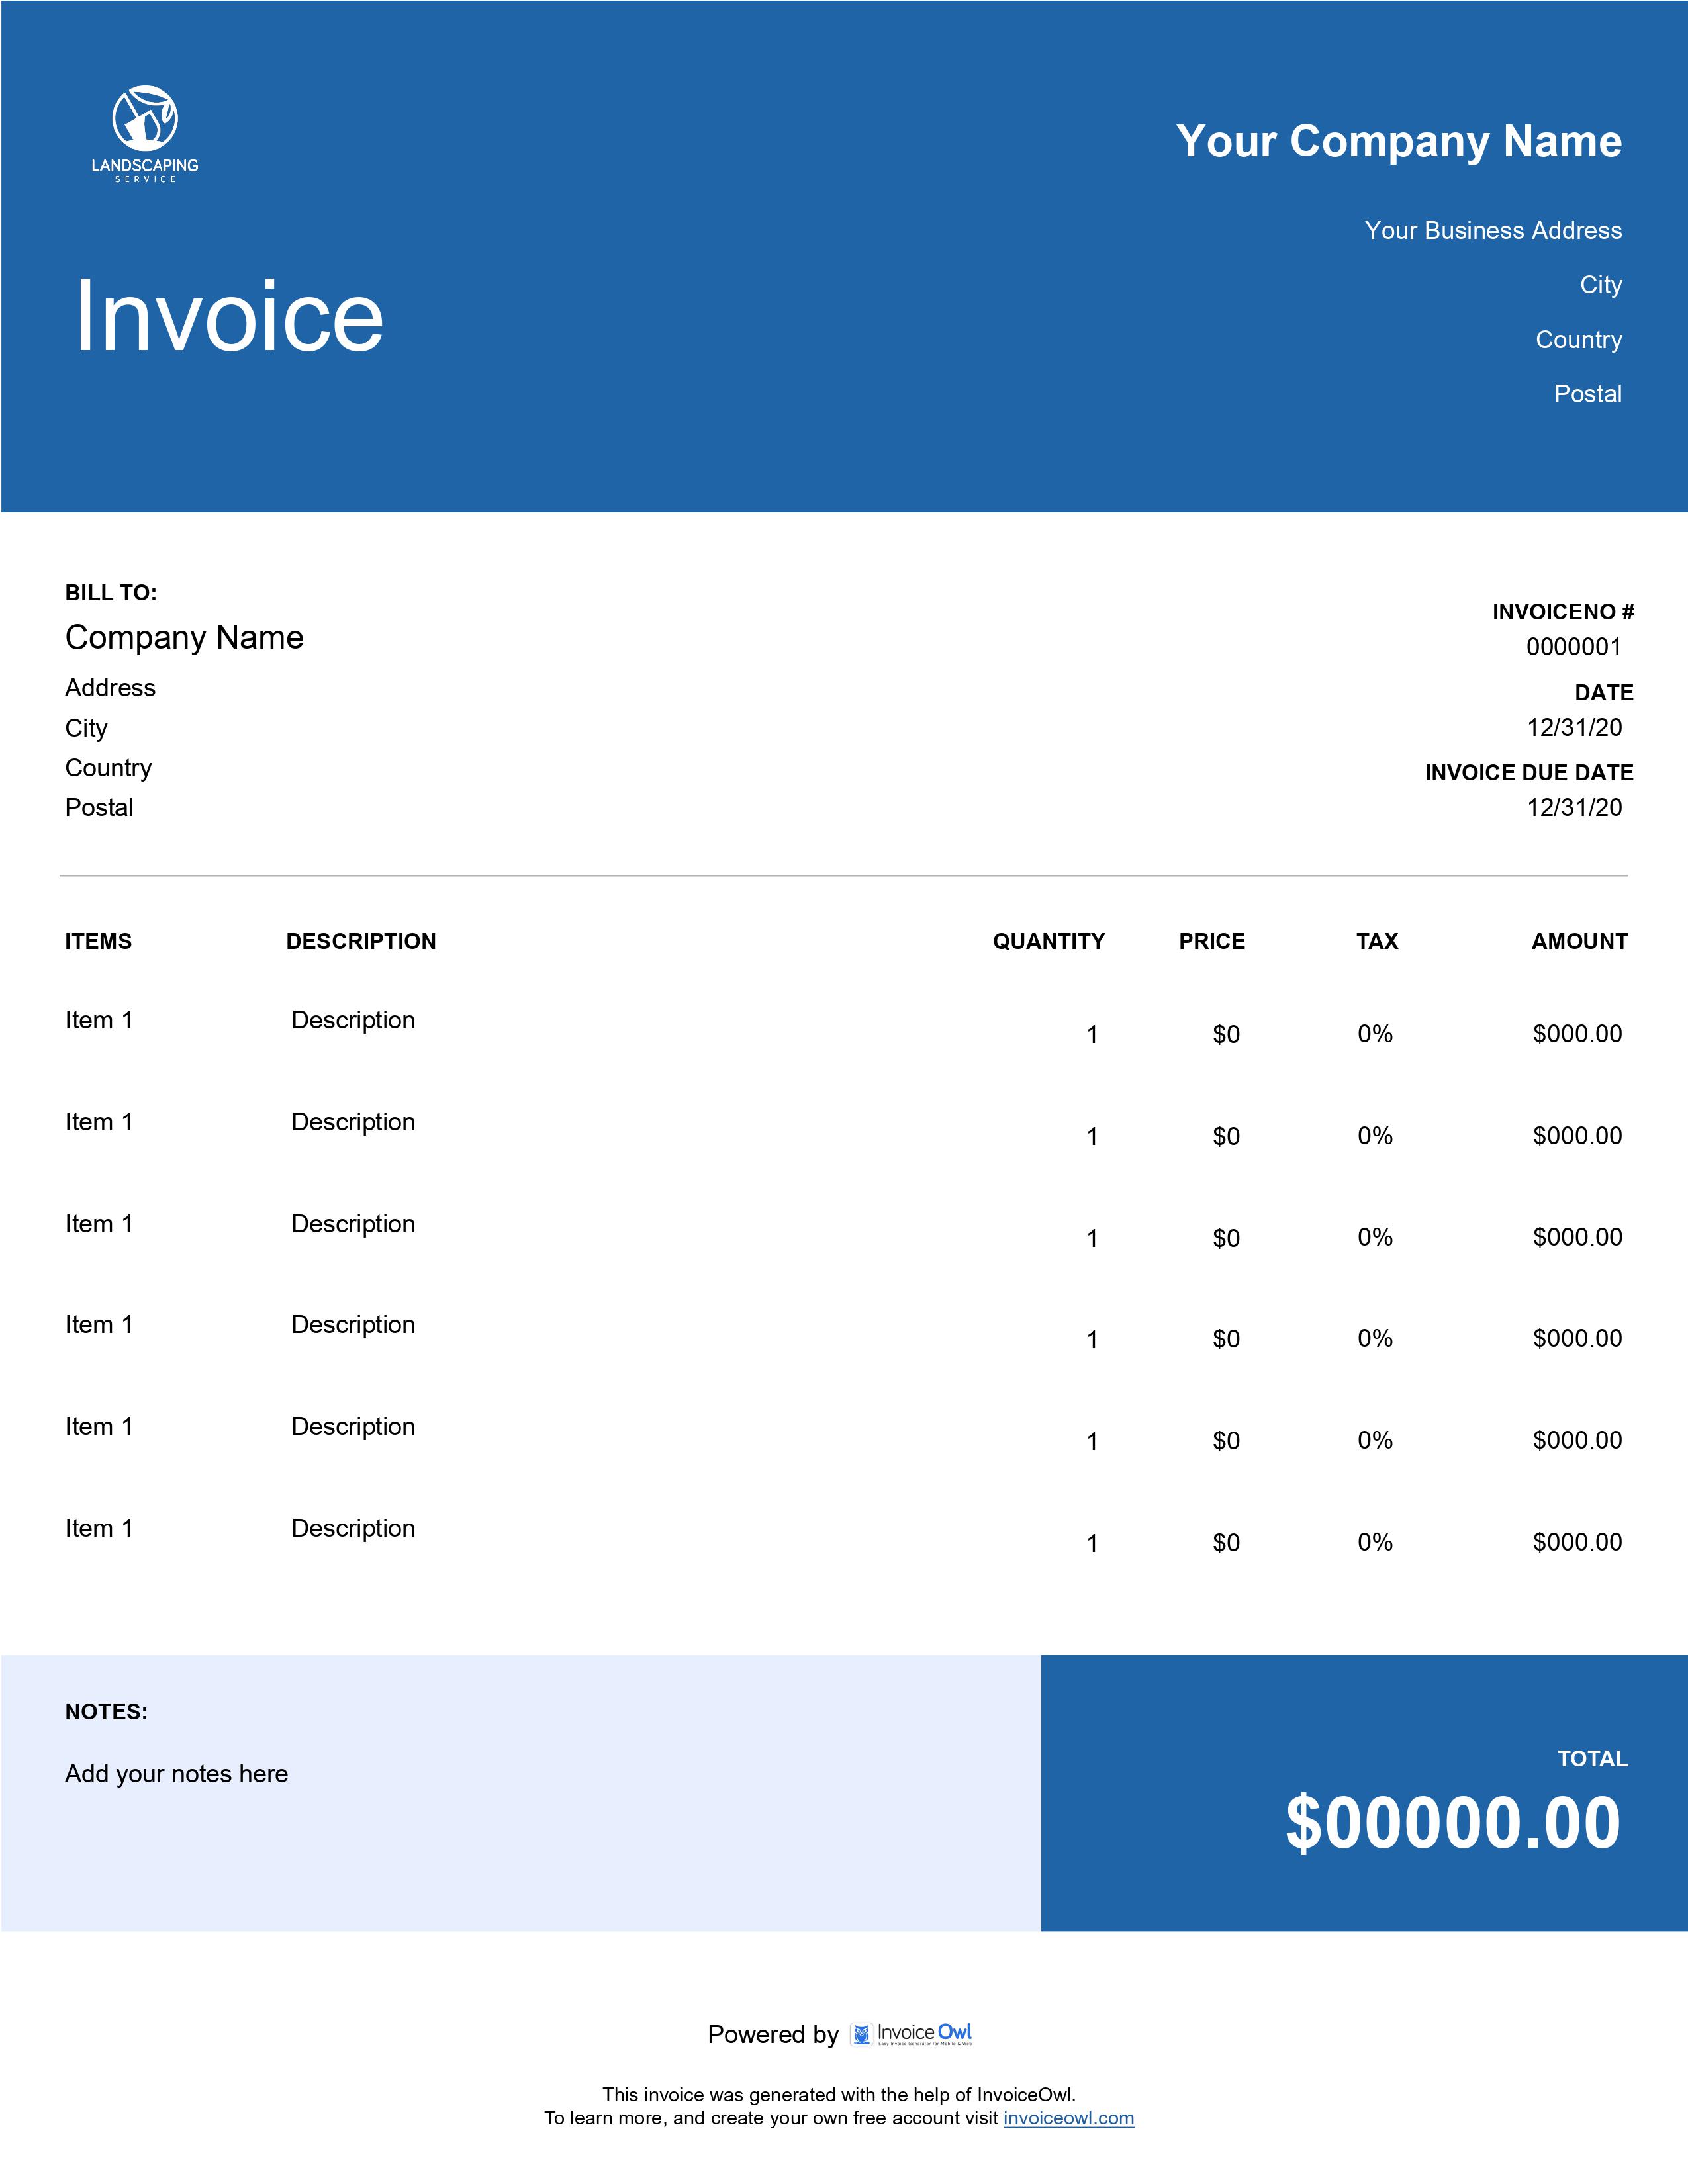 Mulching services business invoice template